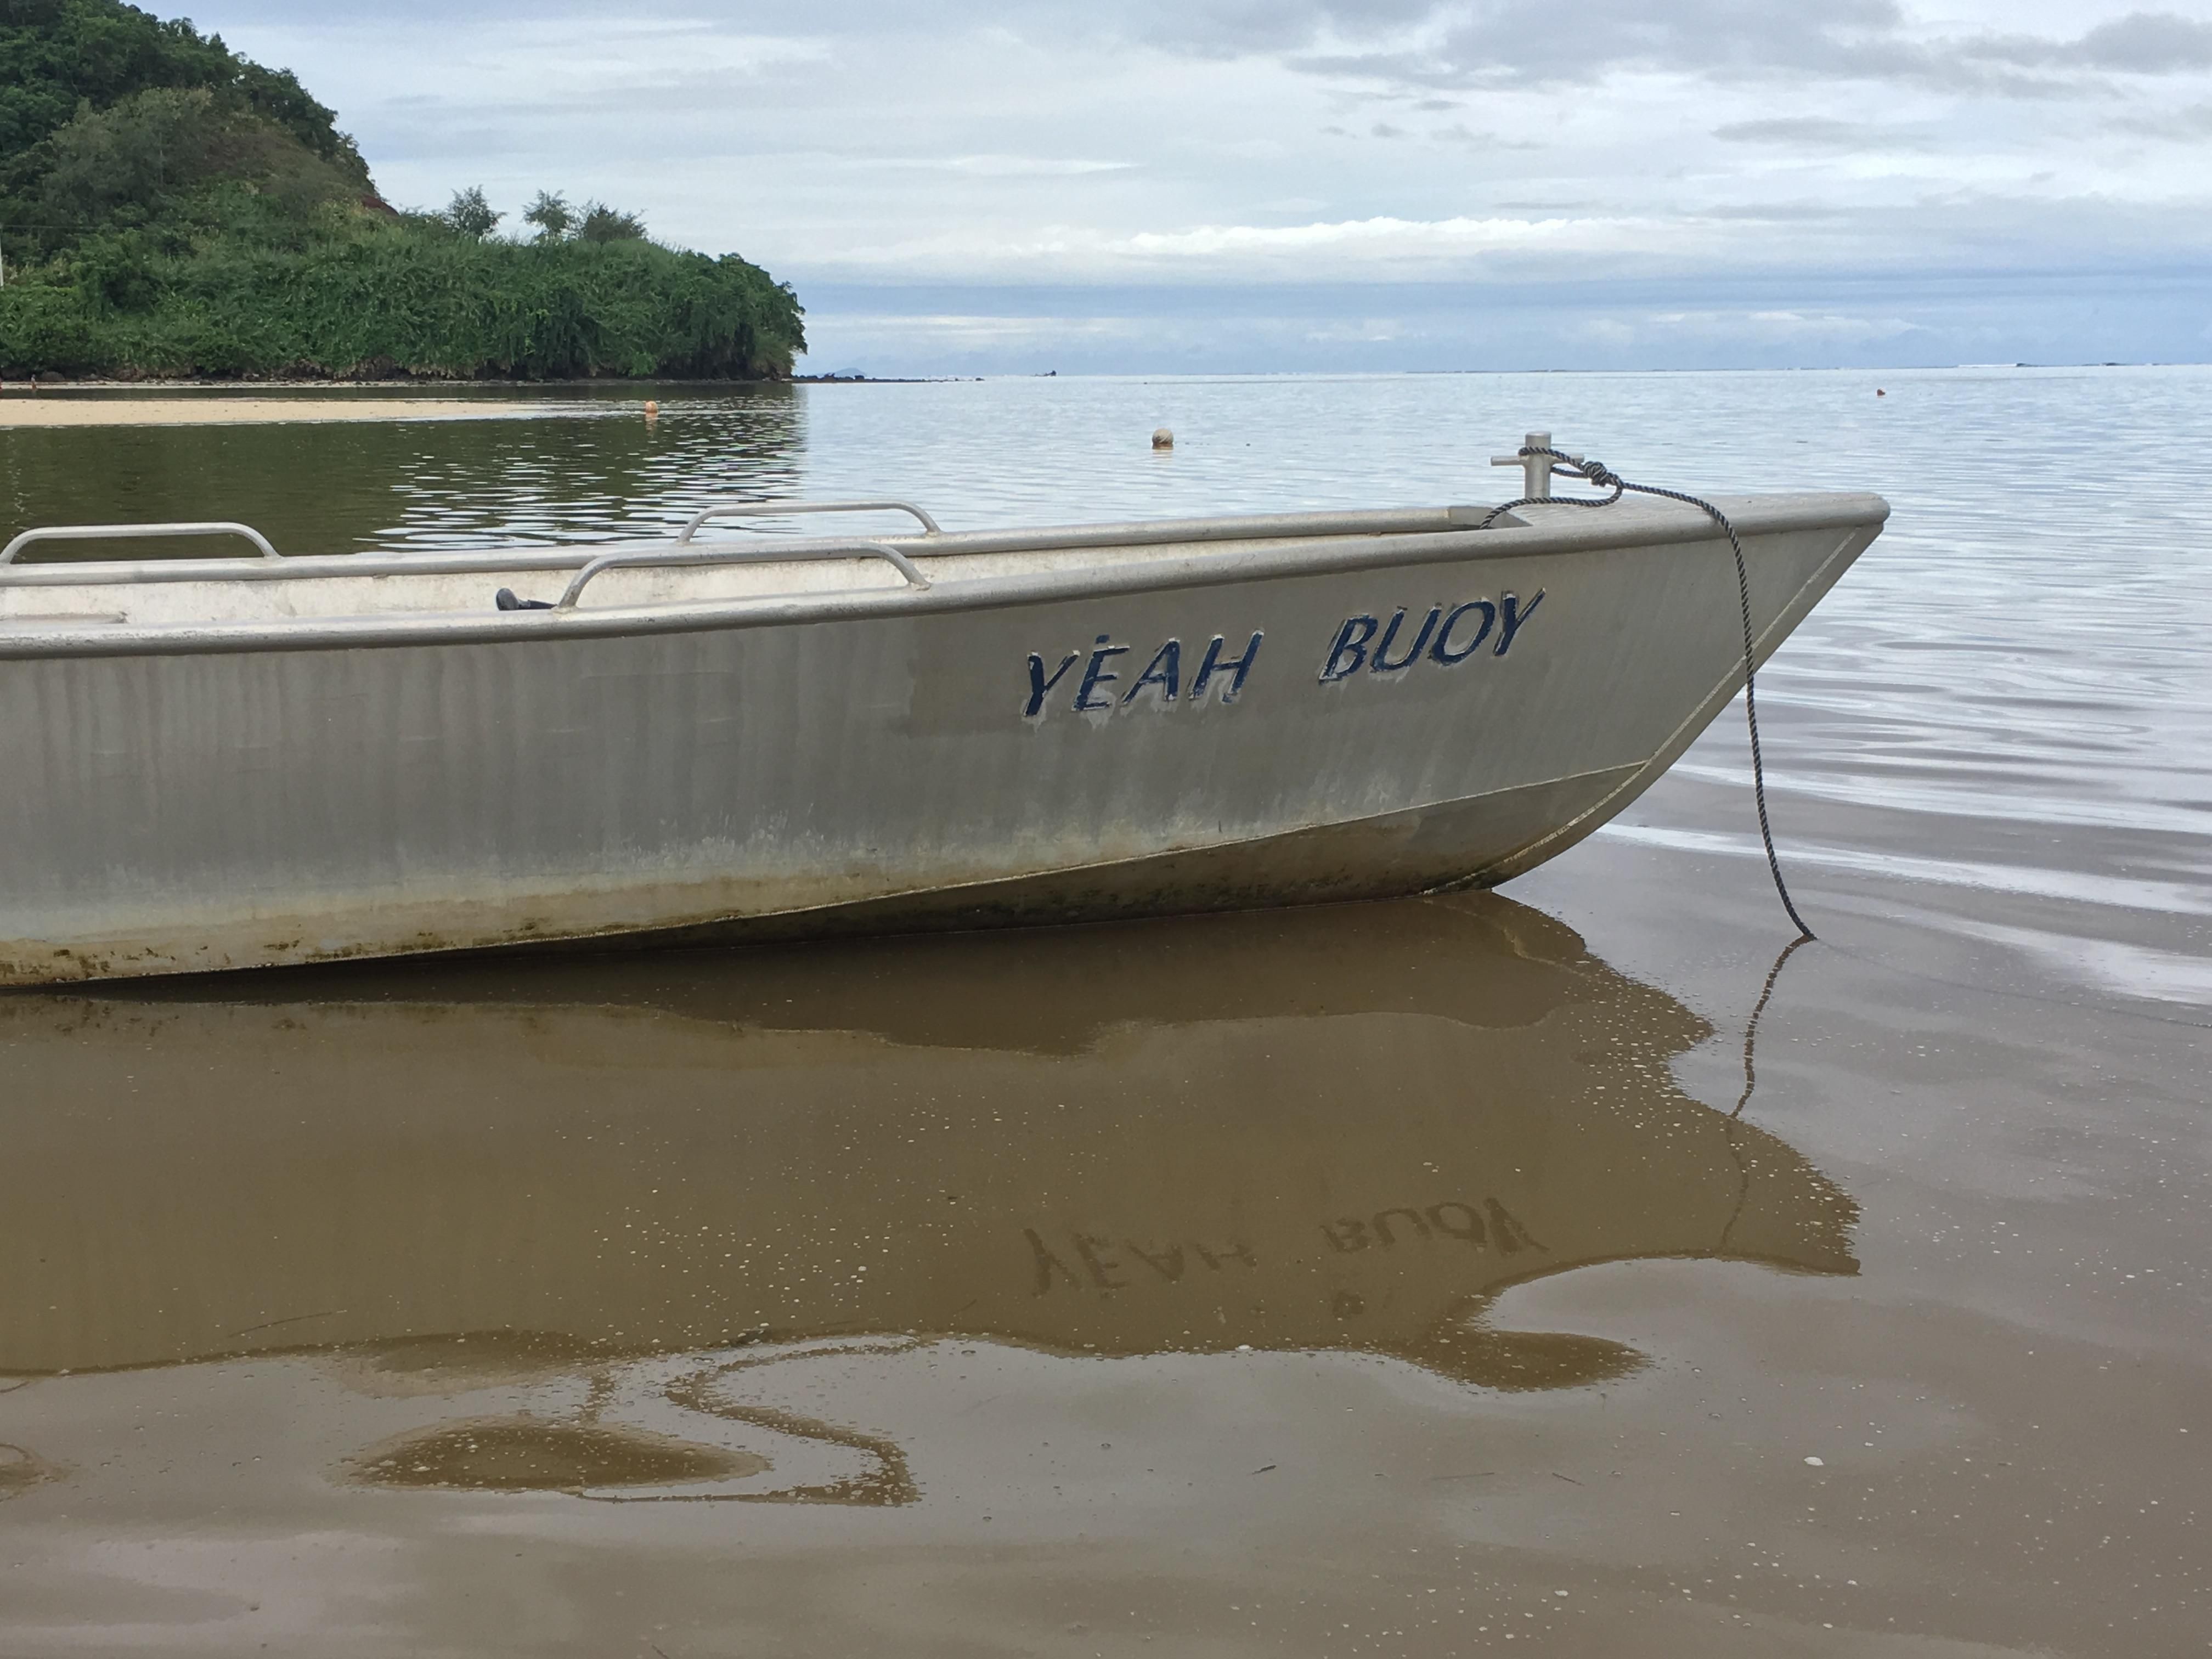 This boat in Fiji has the best name ever